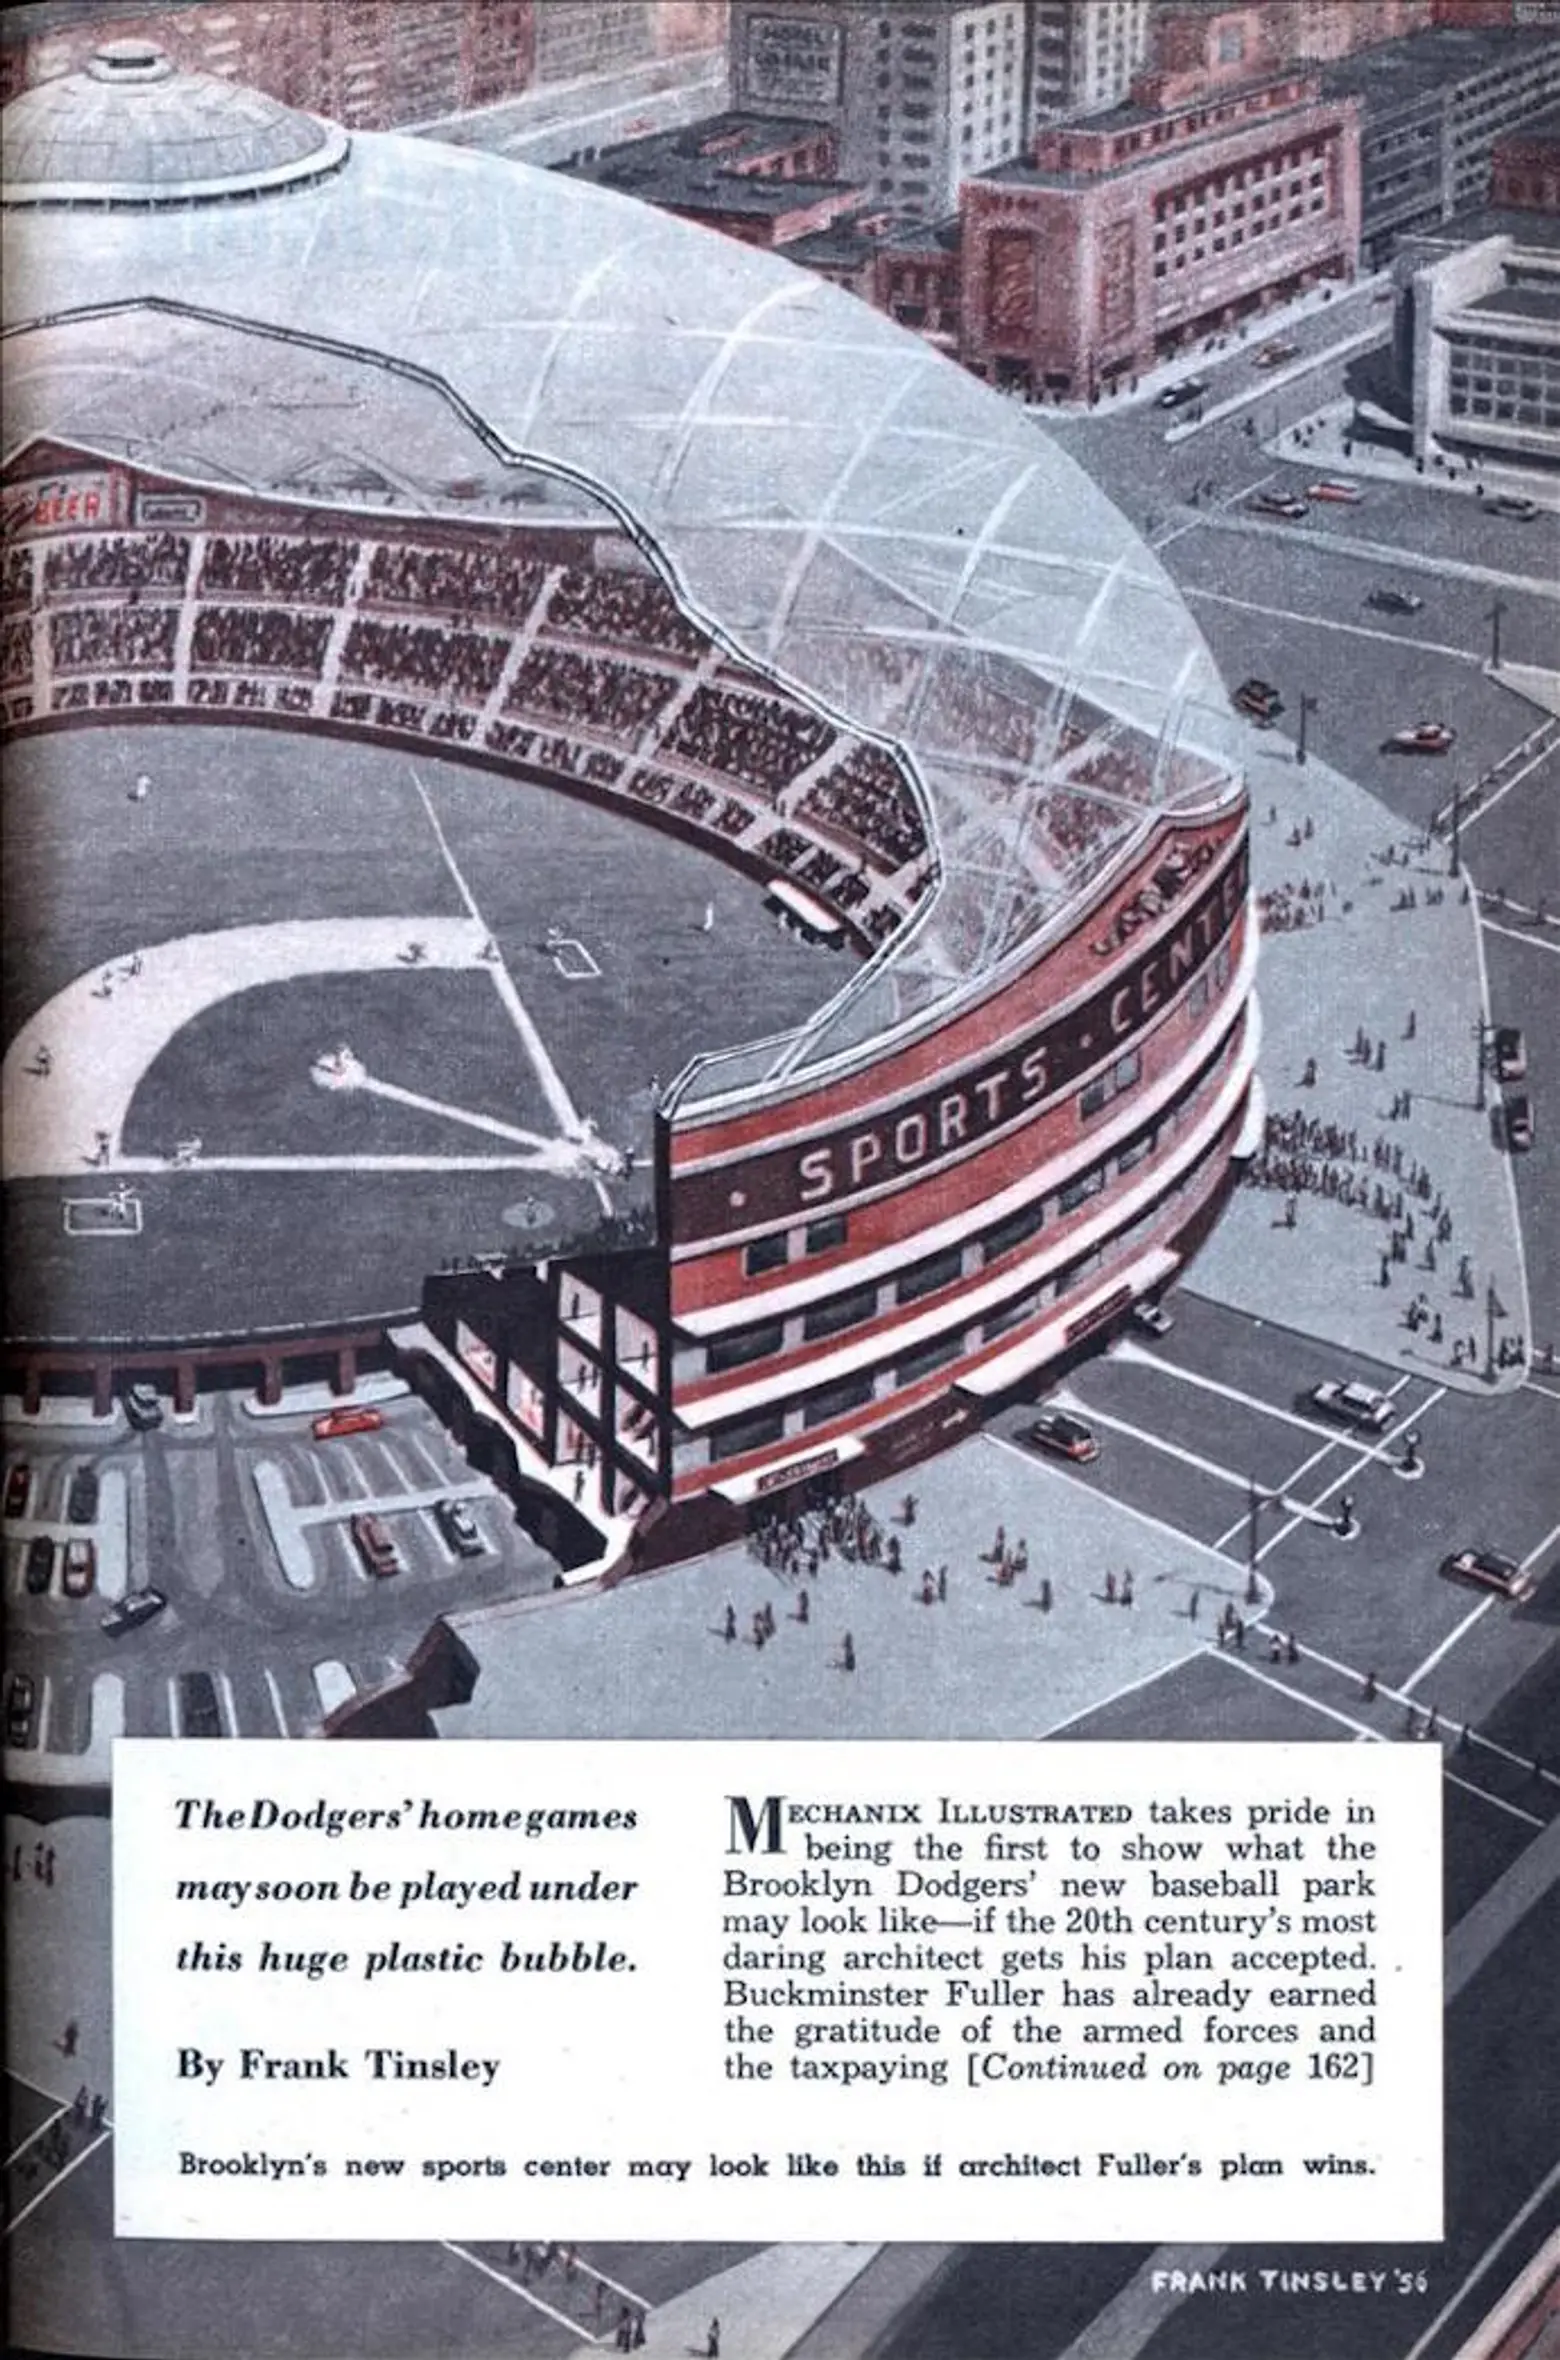 A Buckminster Fuller Dome Almost Kept the Dodgers in Brooklyn